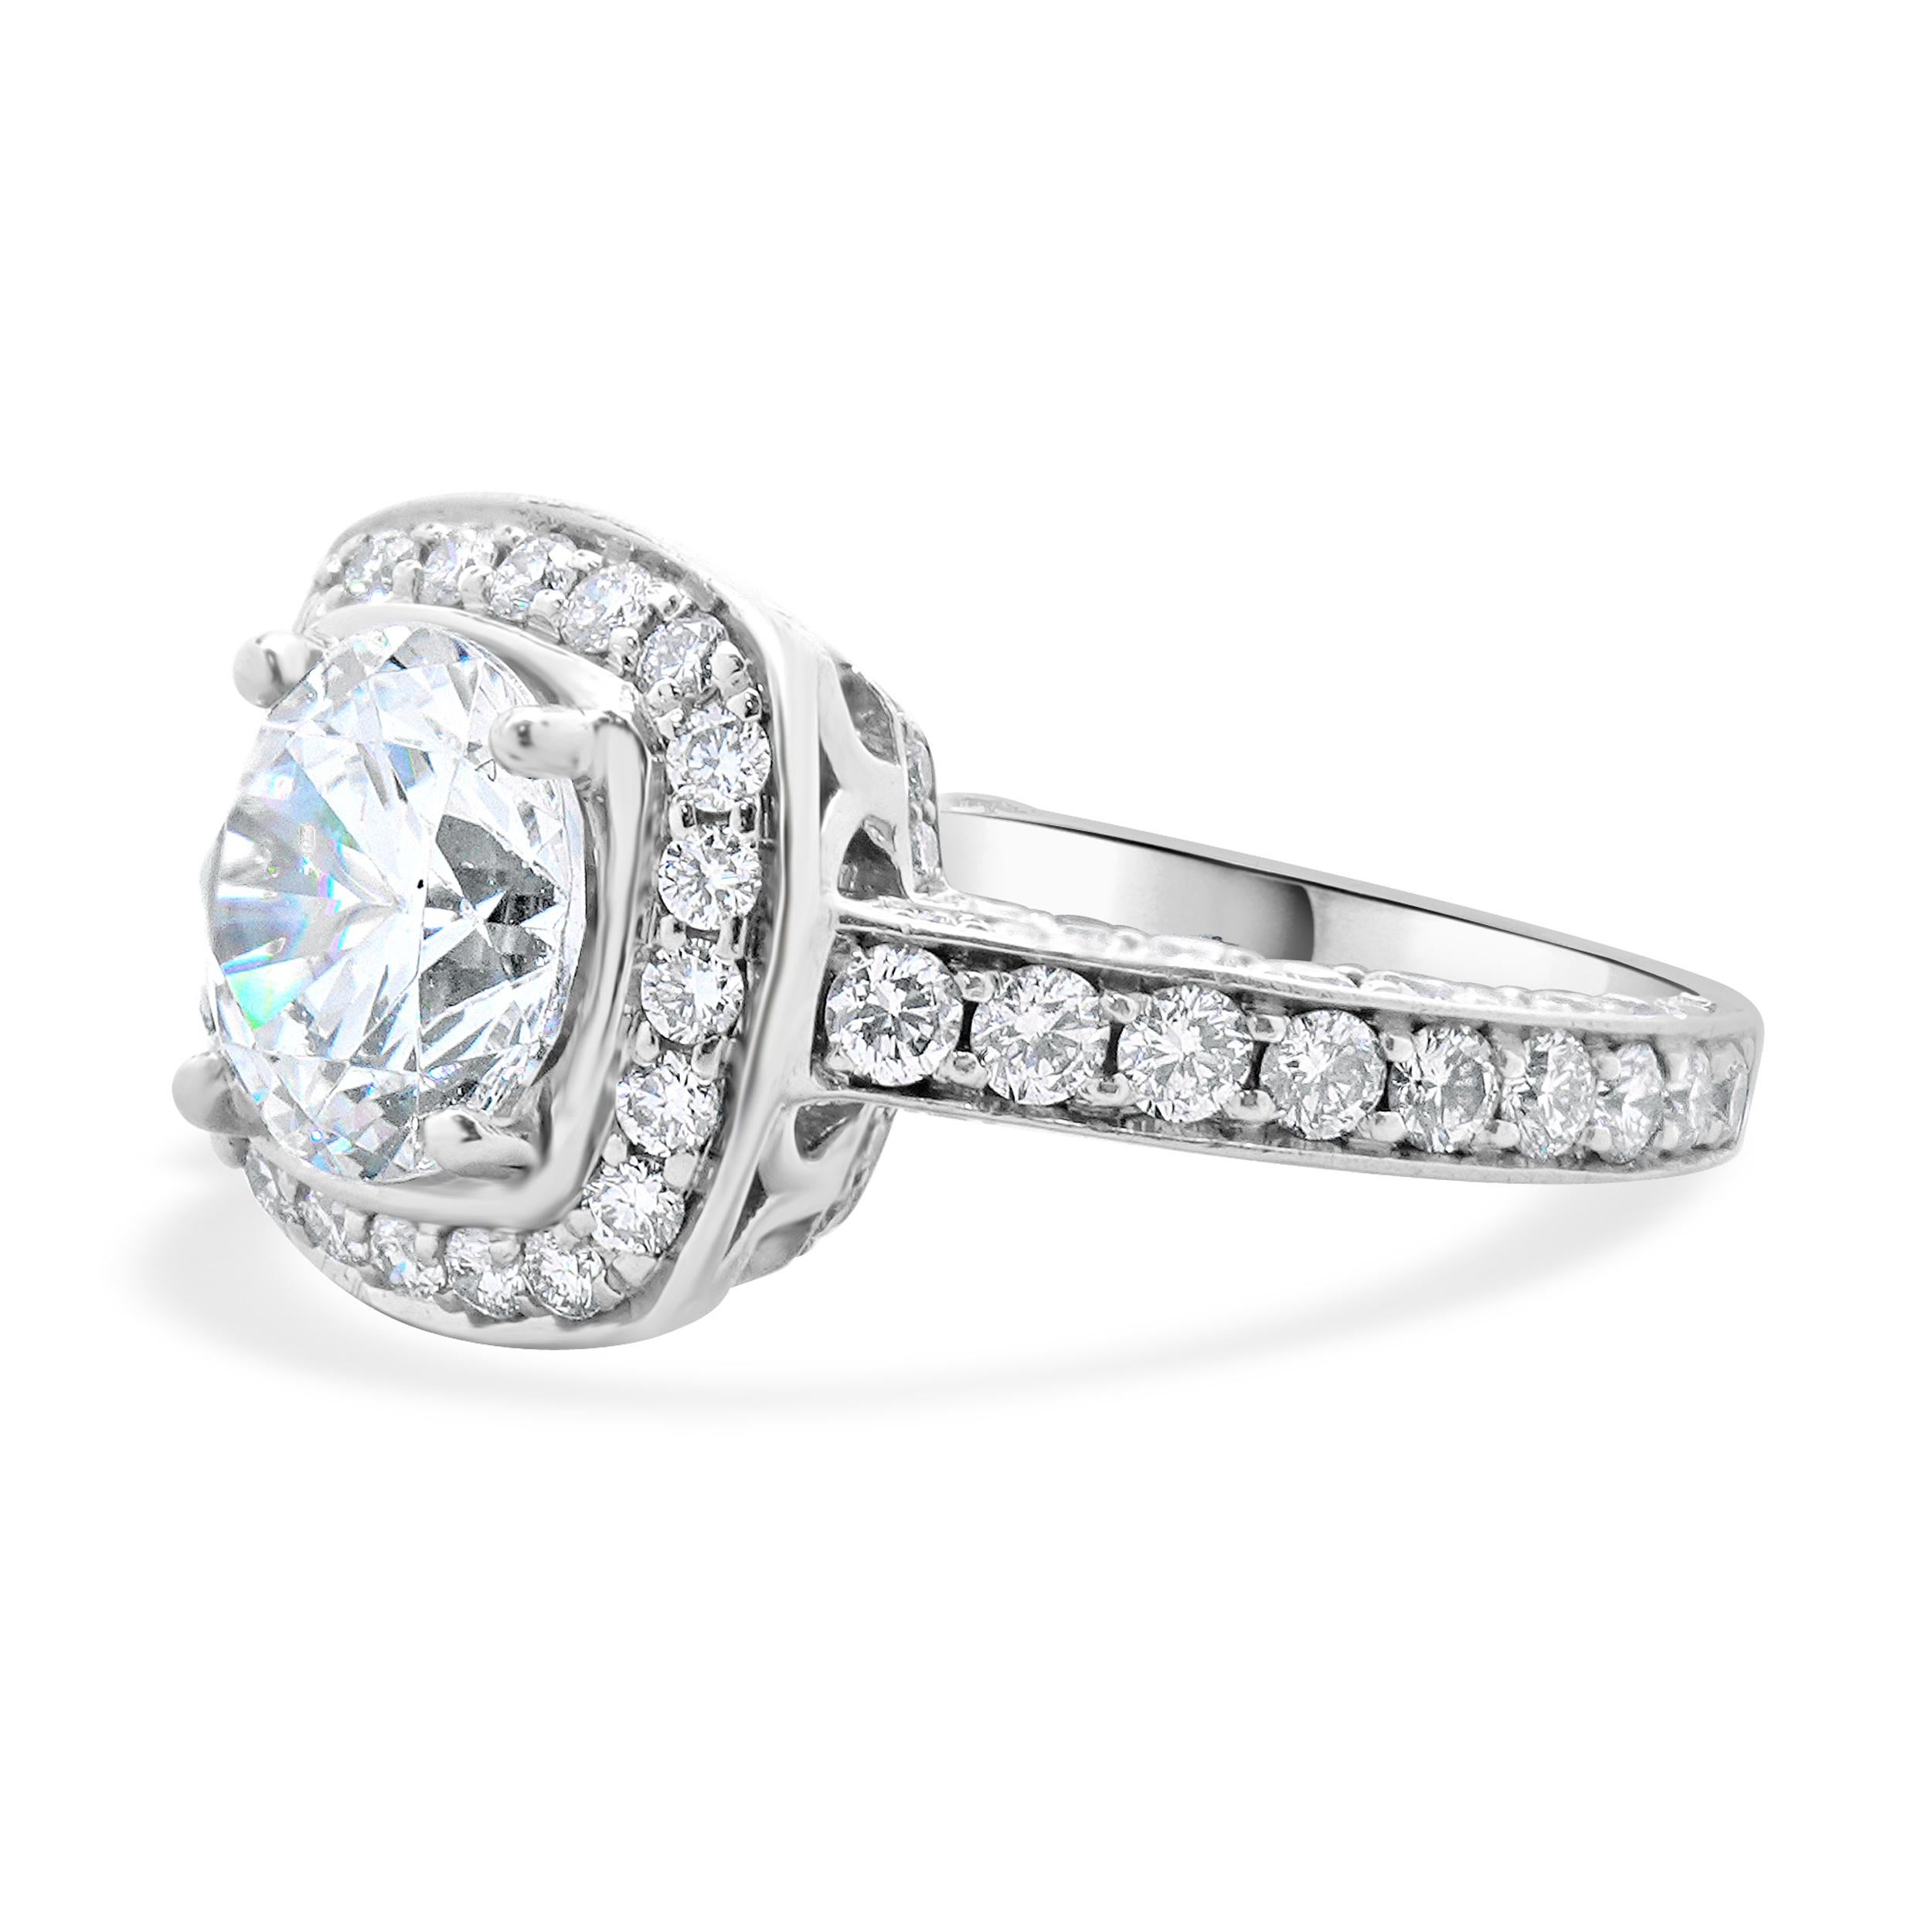 Material: 18K white gold
Diamonds: 110 round brilliant cut = 1.45cttw 
Color: G
Clarity: VS1-2
Ring Size: 6 (please allow up to 2 additional business days for sizing requests)
Dimensions: ring top measures 12.2mm
Weight: 6.44 grams
